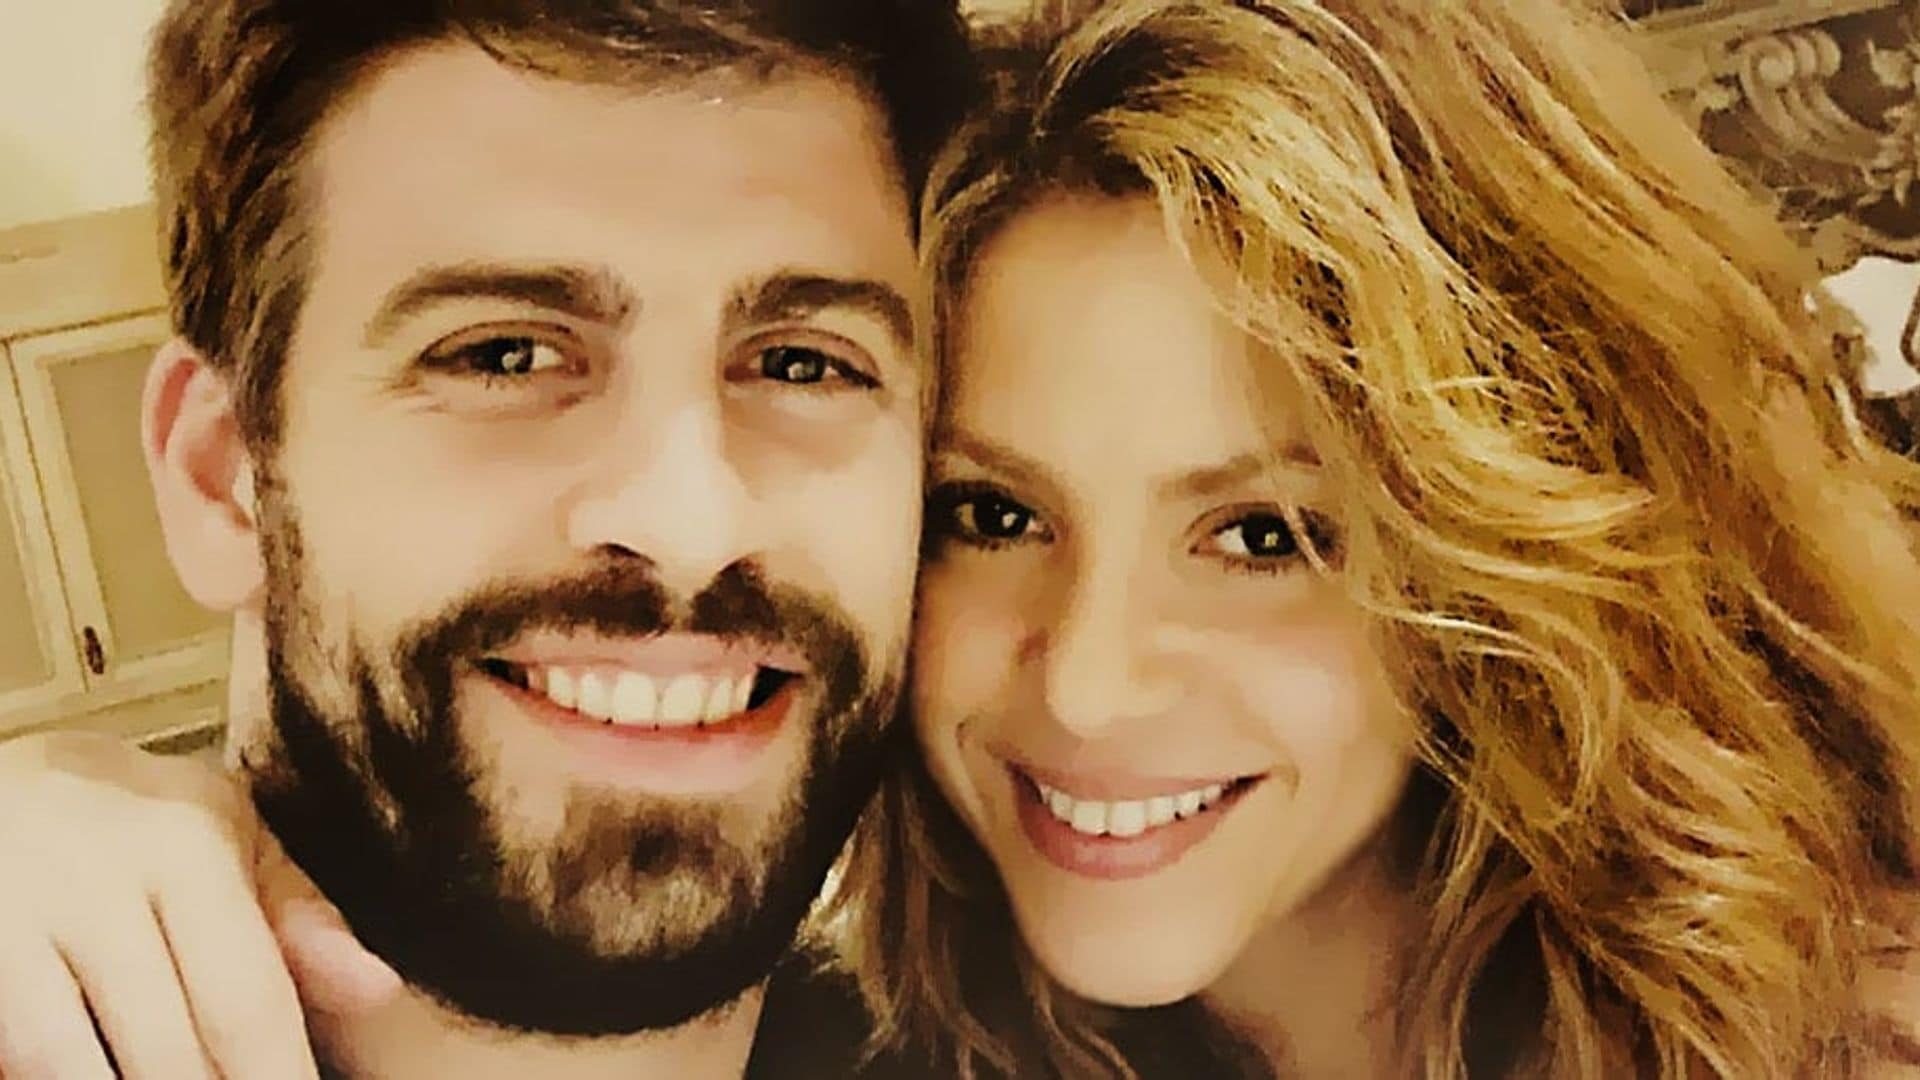 Happy birthday, Shakira and Piqué! Relive their meant-to-be love story